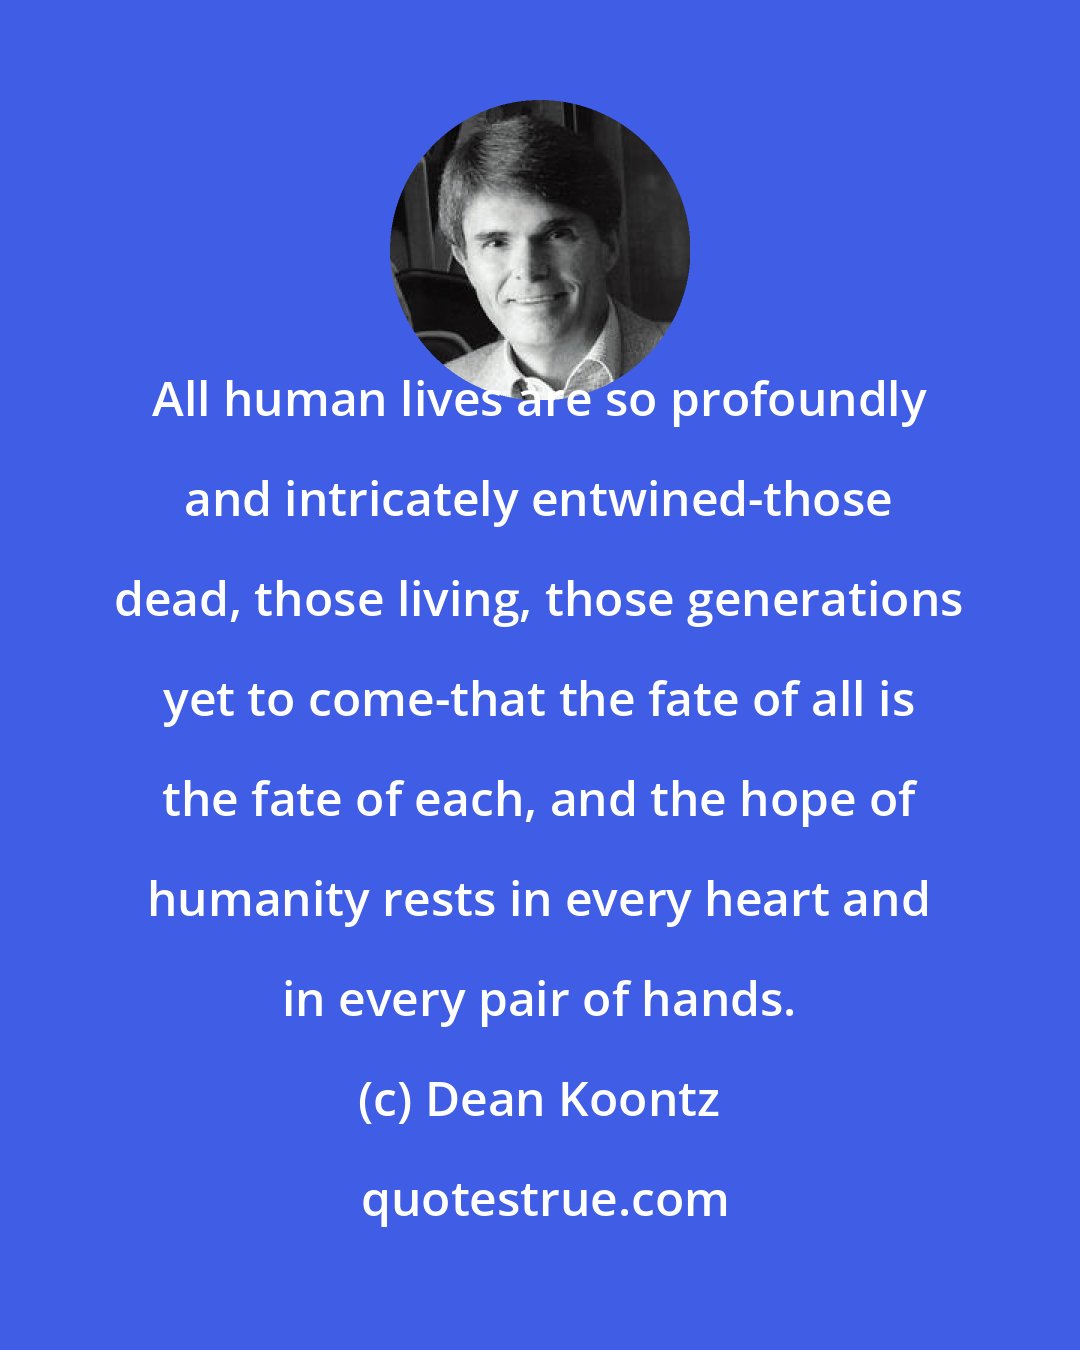 Dean Koontz: All human lives are so profoundly and intricately entwined-those dead, those living, those generations yet to come-that the fate of all is the fate of each, and the hope of humanity rests in every heart and in every pair of hands.